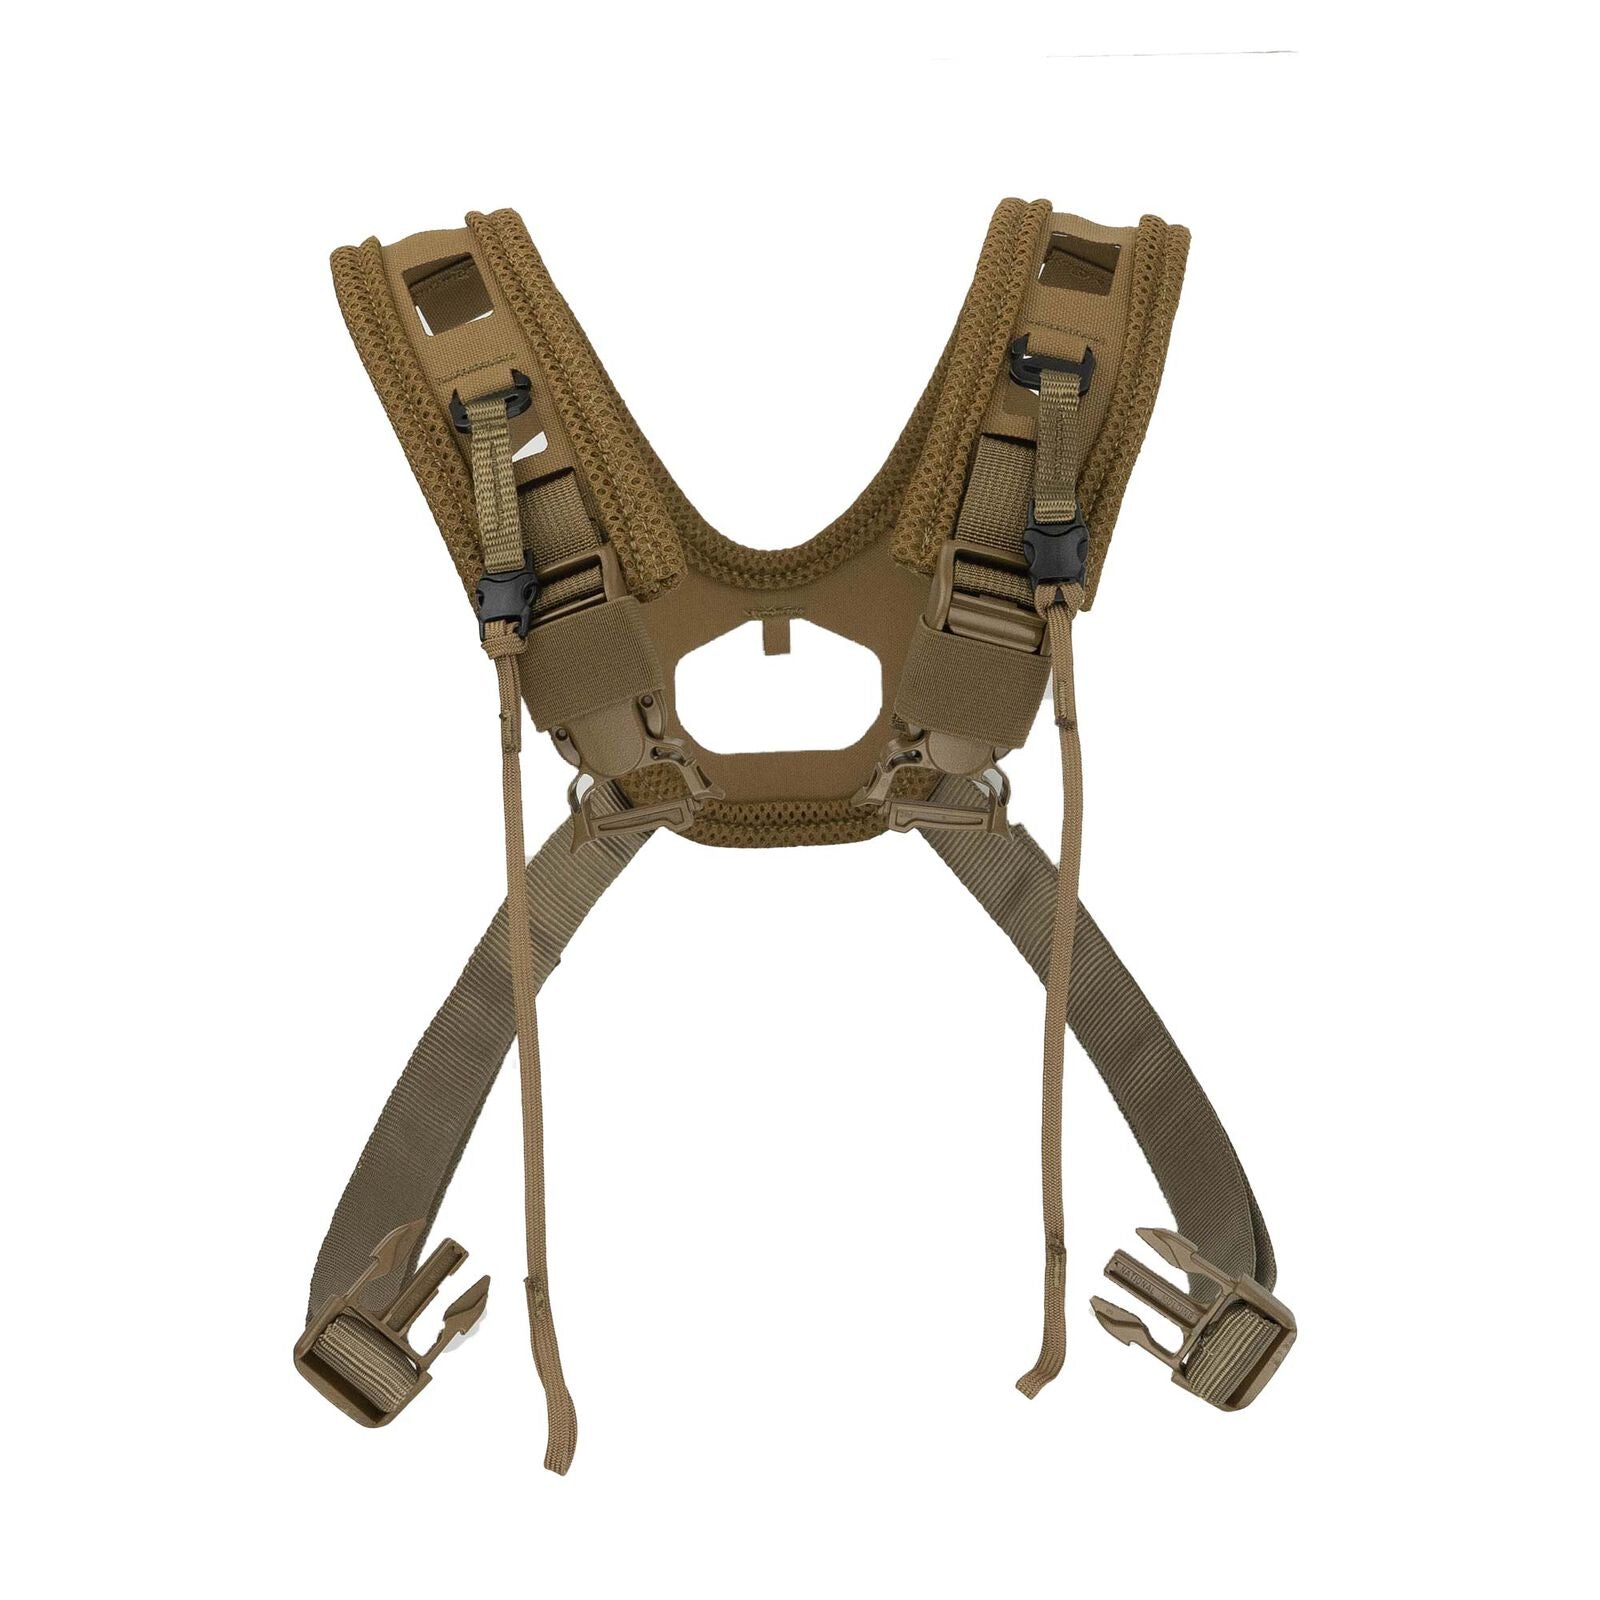 FHF Gear Airframe Harness Back